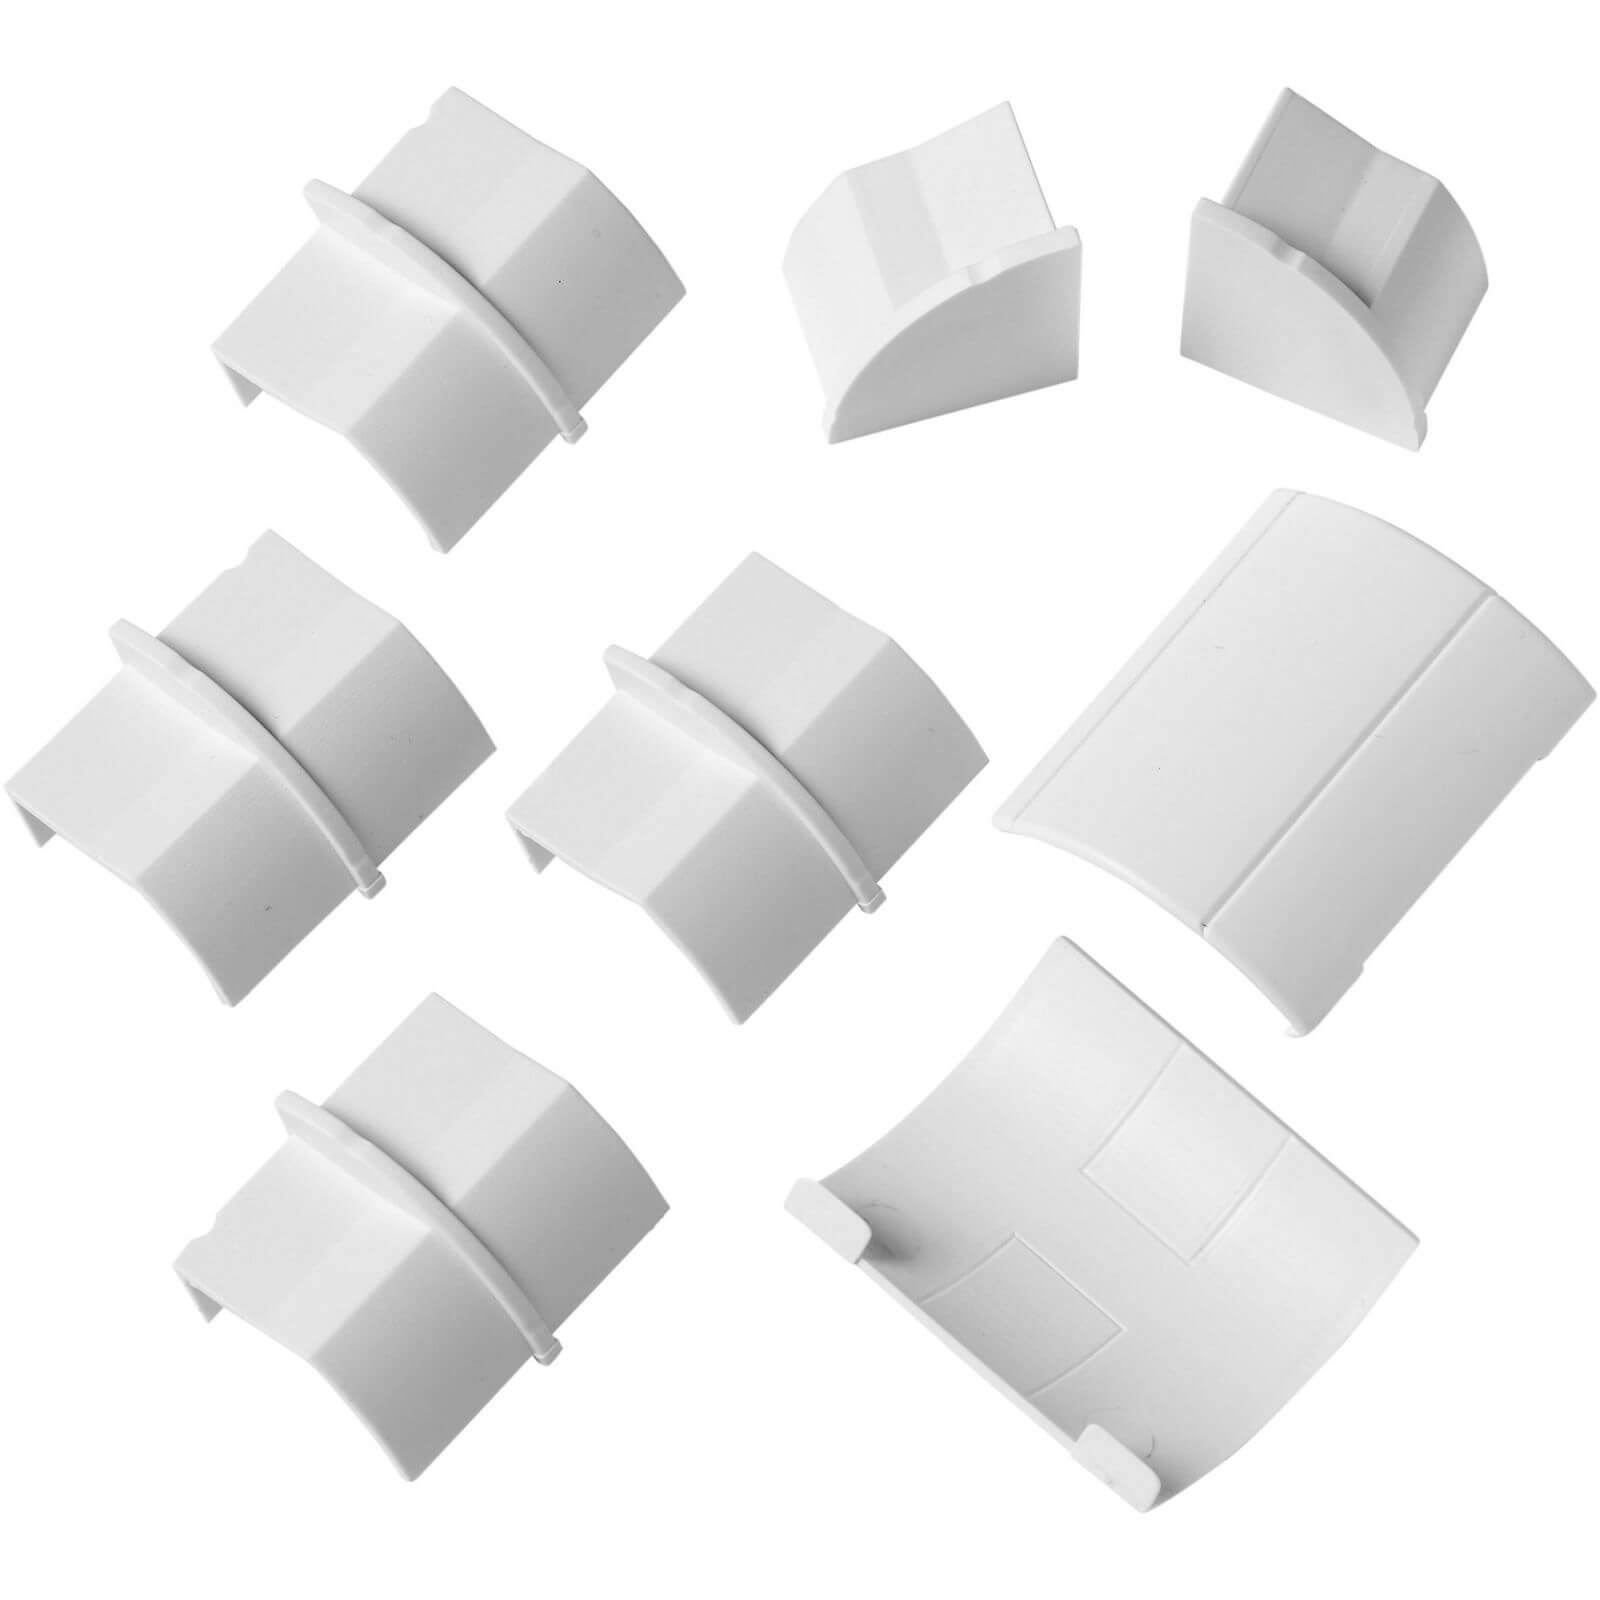 Photo of D-line Quadrant Decorative Trunking Clip Over 8 Piece Accessory Multipack 22mm X 22mm White